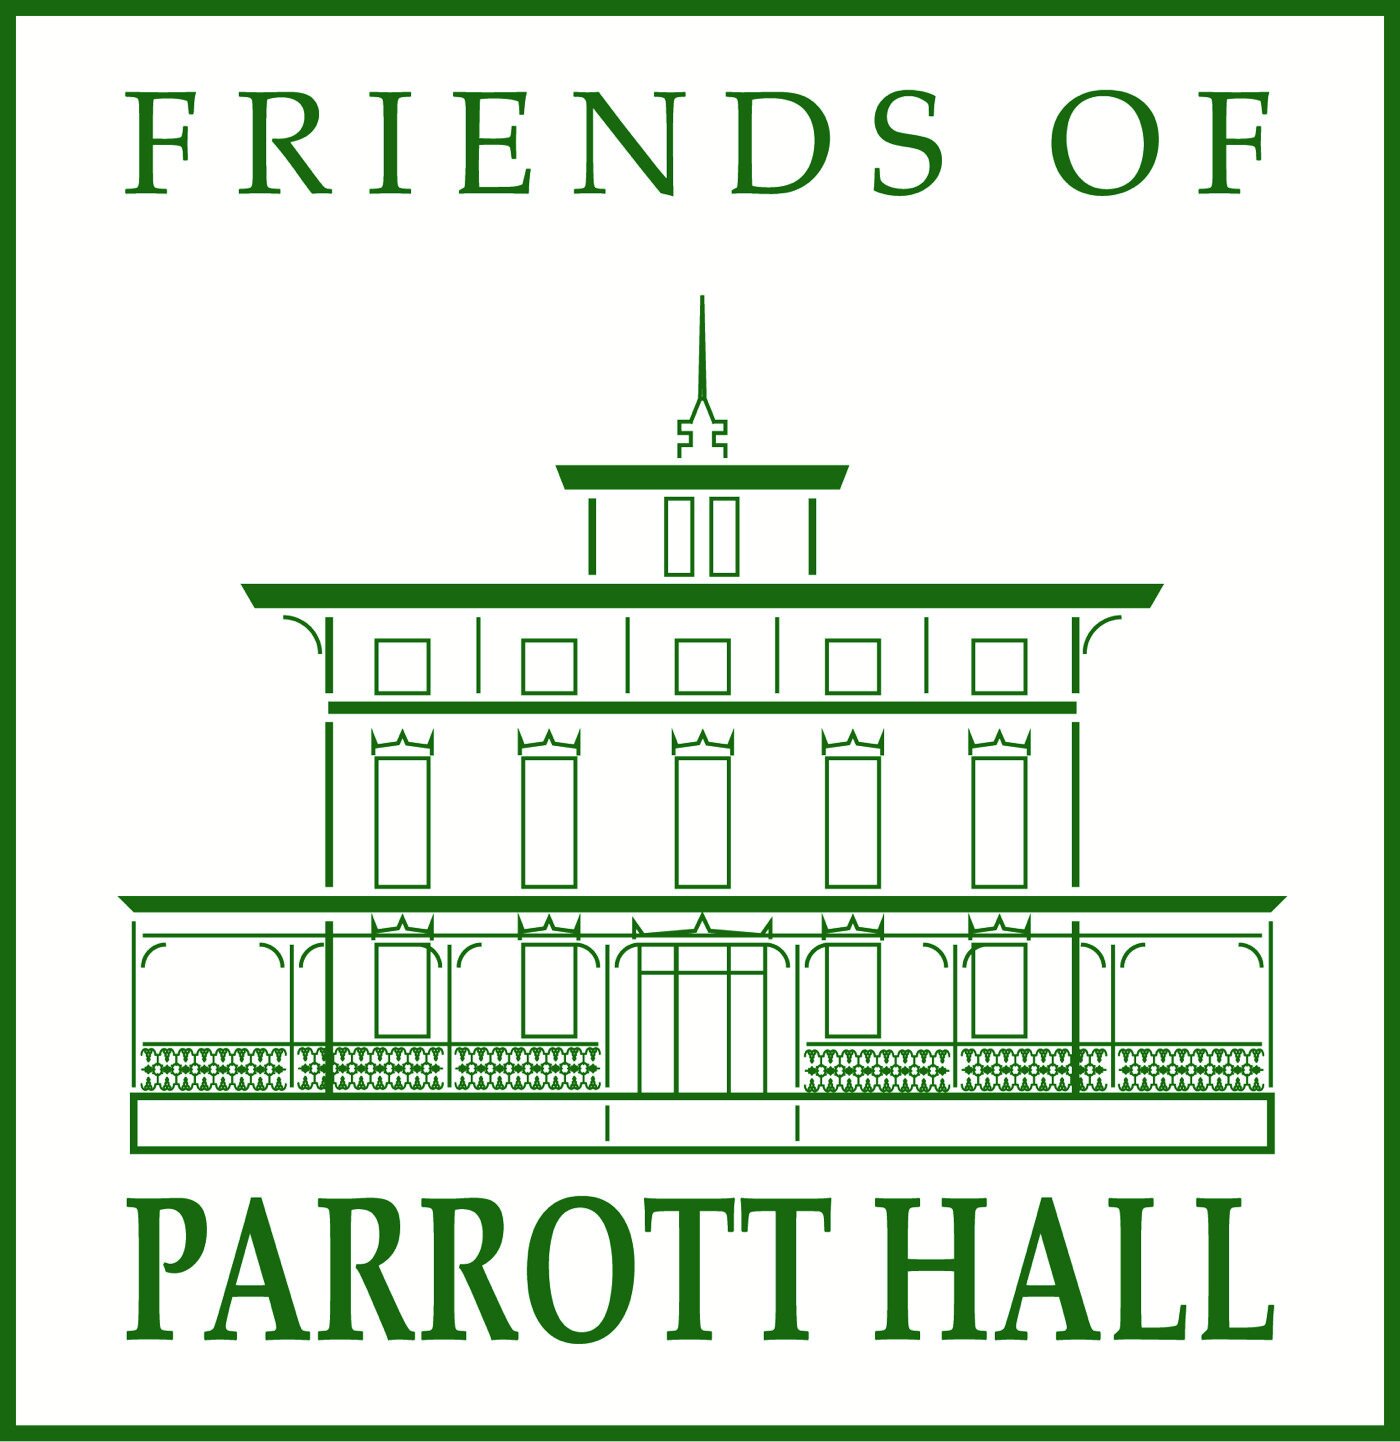 Friends of Parrott Hall: Sharing the history of Parrott Hall through preservation, education, and community service. 